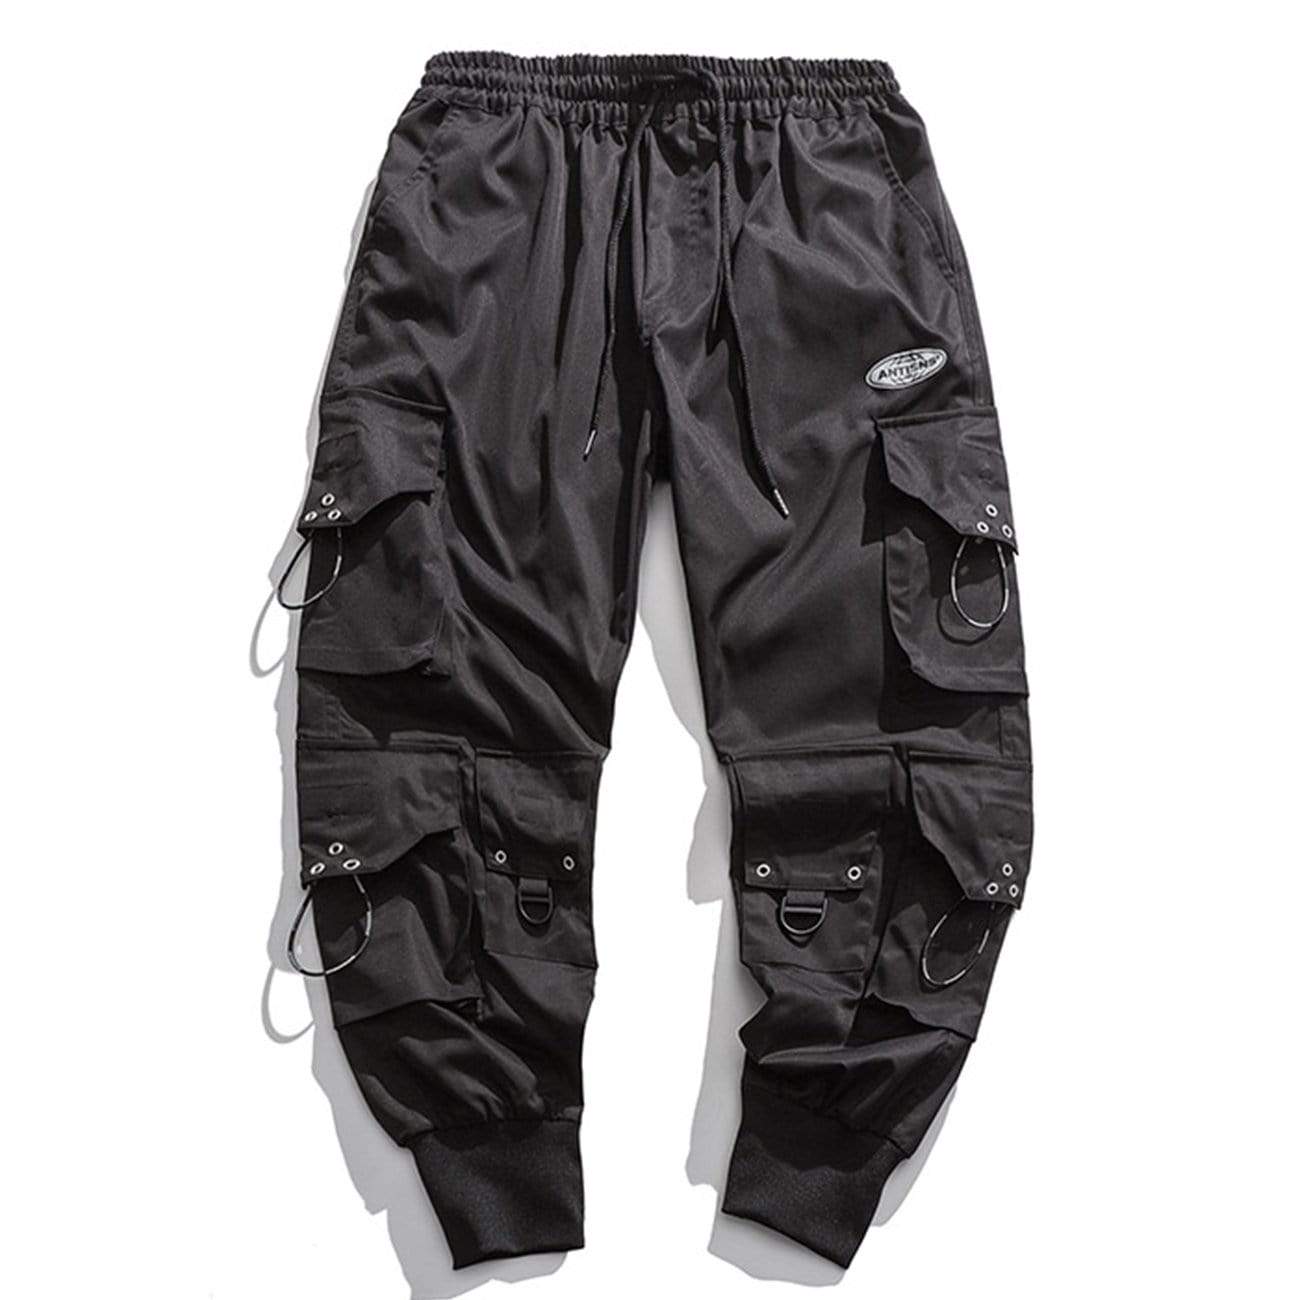 WLS Reserved Pants